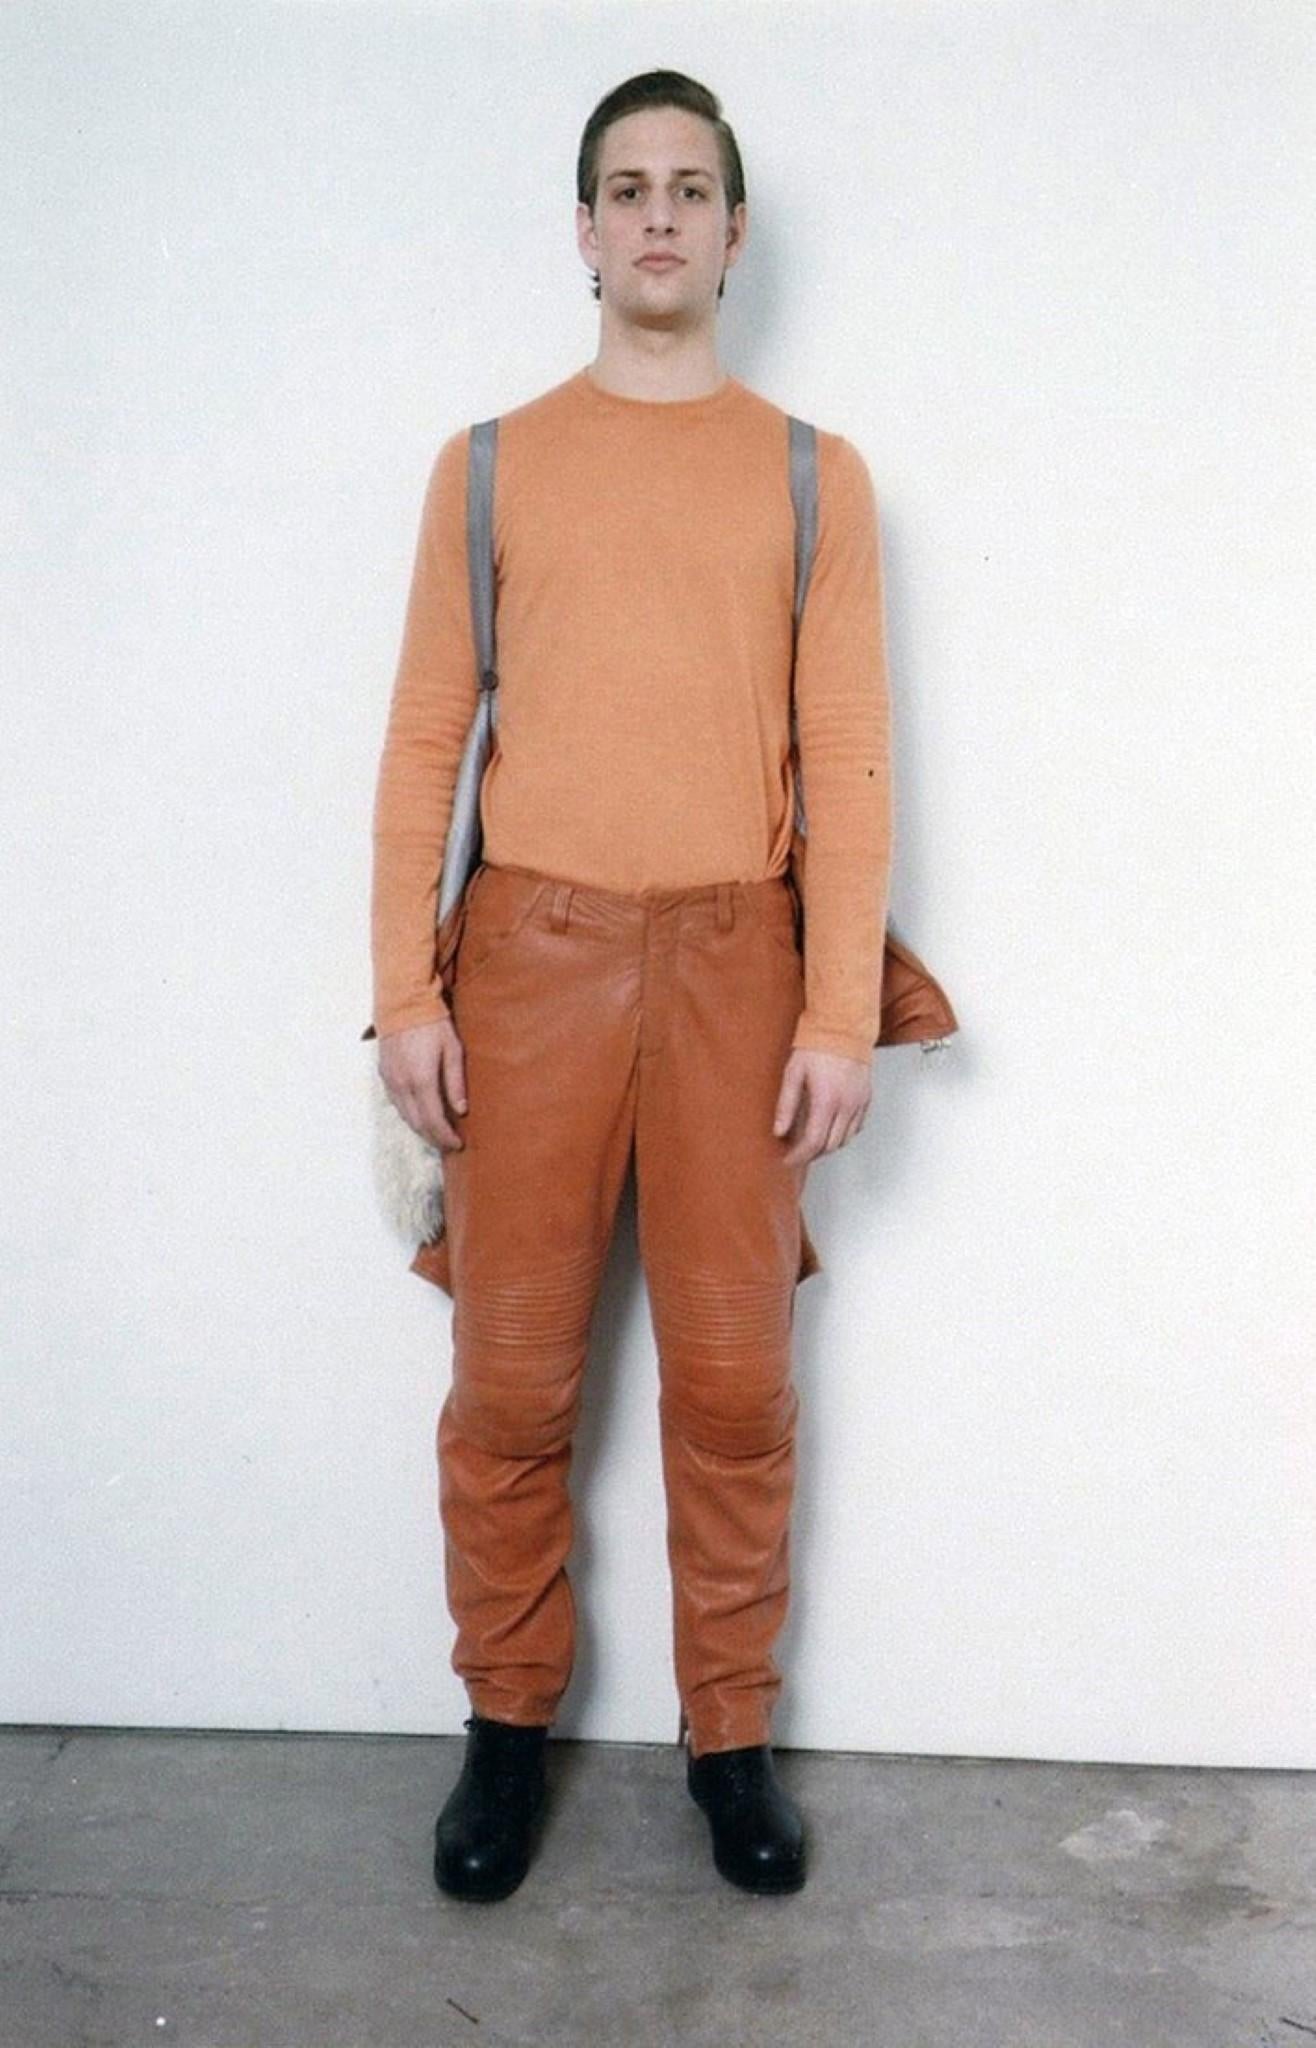 Archive HELMUT LANG Fall Winter 1999 space pants come in distressed orange leather with zip ankles, quilted knee pad details, and bondage strap waistband.Made in Italy.

Excellent Pre-Owned Condition.
Marked: IT 40 M  HD

Measurements:

Waist: 30